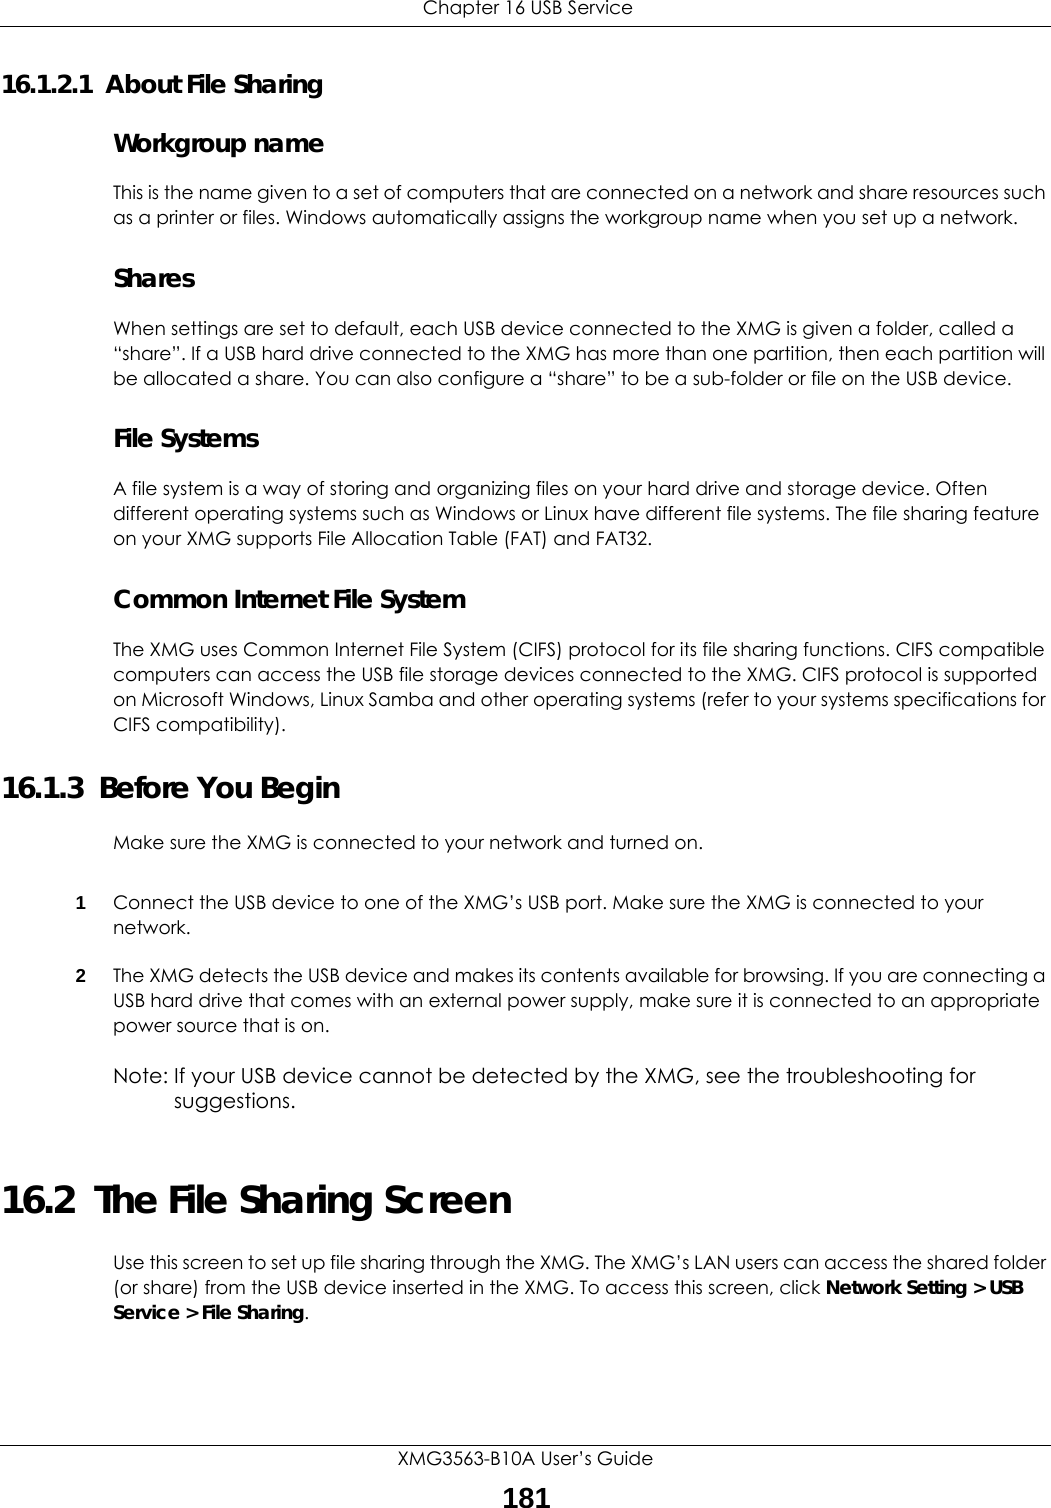  Chapter 16 USB ServiceXMG3563-B10A User’s Guide18116.1.2.1  About File SharingWorkgroup nameThis is the name given to a set of computers that are connected on a network and share resources such as a printer or files. Windows automatically assigns the workgroup name when you set up a network. SharesWhen settings are set to default, each USB device connected to the XMG is given a folder, called a “share”. If a USB hard drive connected to the XMG has more than one partition, then each partition will be allocated a share. You can also configure a “share” to be a sub-folder or file on the USB device.File SystemsA file system is a way of storing and organizing files on your hard drive and storage device. Often different operating systems such as Windows or Linux have different file systems. The file sharing feature on your XMG supports File Allocation Table (FAT) and FAT32. Common Internet File SystemThe XMG uses Common Internet File System (CIFS) protocol for its file sharing functions. CIFS compatible computers can access the USB file storage devices connected to the XMG. CIFS protocol is supported on Microsoft Windows, Linux Samba and other operating systems (refer to your systems specifications for CIFS compatibility). 16.1.3  Before You BeginMake sure the XMG is connected to your network and turned on.1Connect the USB device to one of the XMG’s USB port. Make sure the XMG is connected to your network.2The XMG detects the USB device and makes its contents available for browsing. If you are connecting a USB hard drive that comes with an external power supply, make sure it is connected to an appropriate power source that is on.Note: If your USB device cannot be detected by the XMG, see the troubleshooting for suggestions. 16.2  The File Sharing ScreenUse this screen to set up file sharing through the XMG. The XMG’s LAN users can access the shared folder (or share) from the USB device inserted in the XMG. To access this screen, click Network Setting &gt; USB Service &gt; File Sharing.